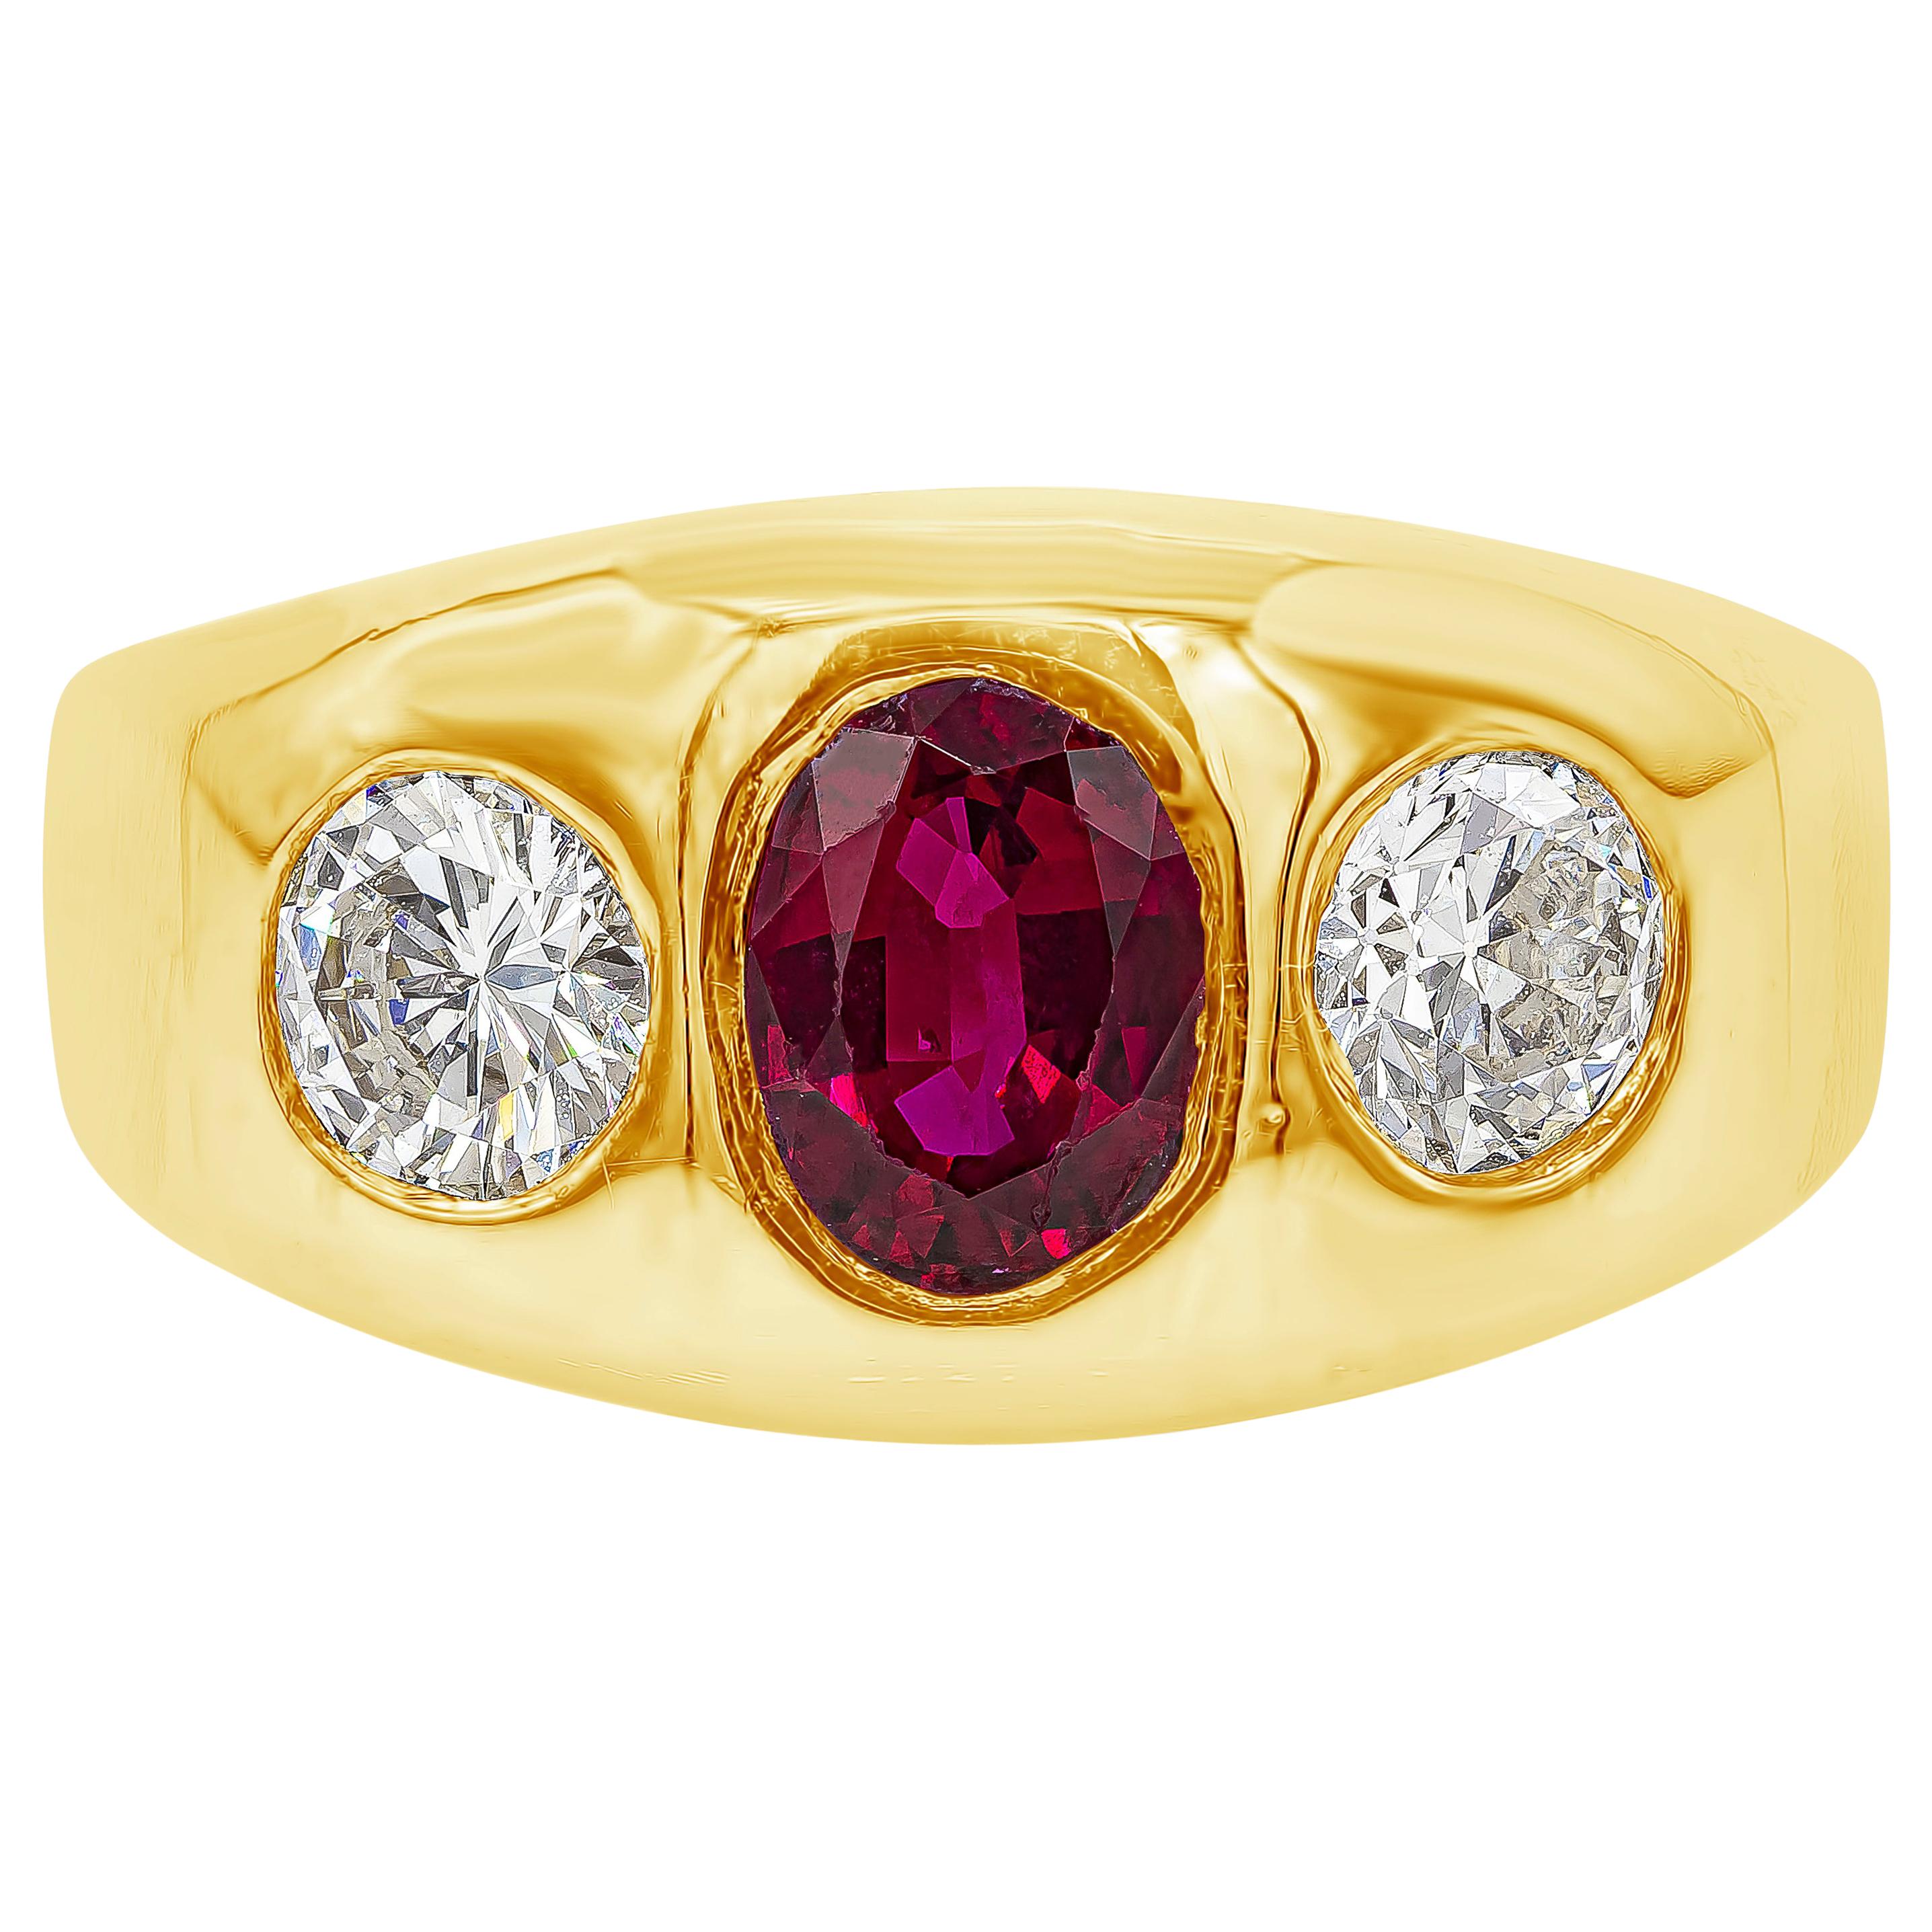 AGL Certified 1.08 Carat Ruby and Diamond Three-Stone Men's Ring